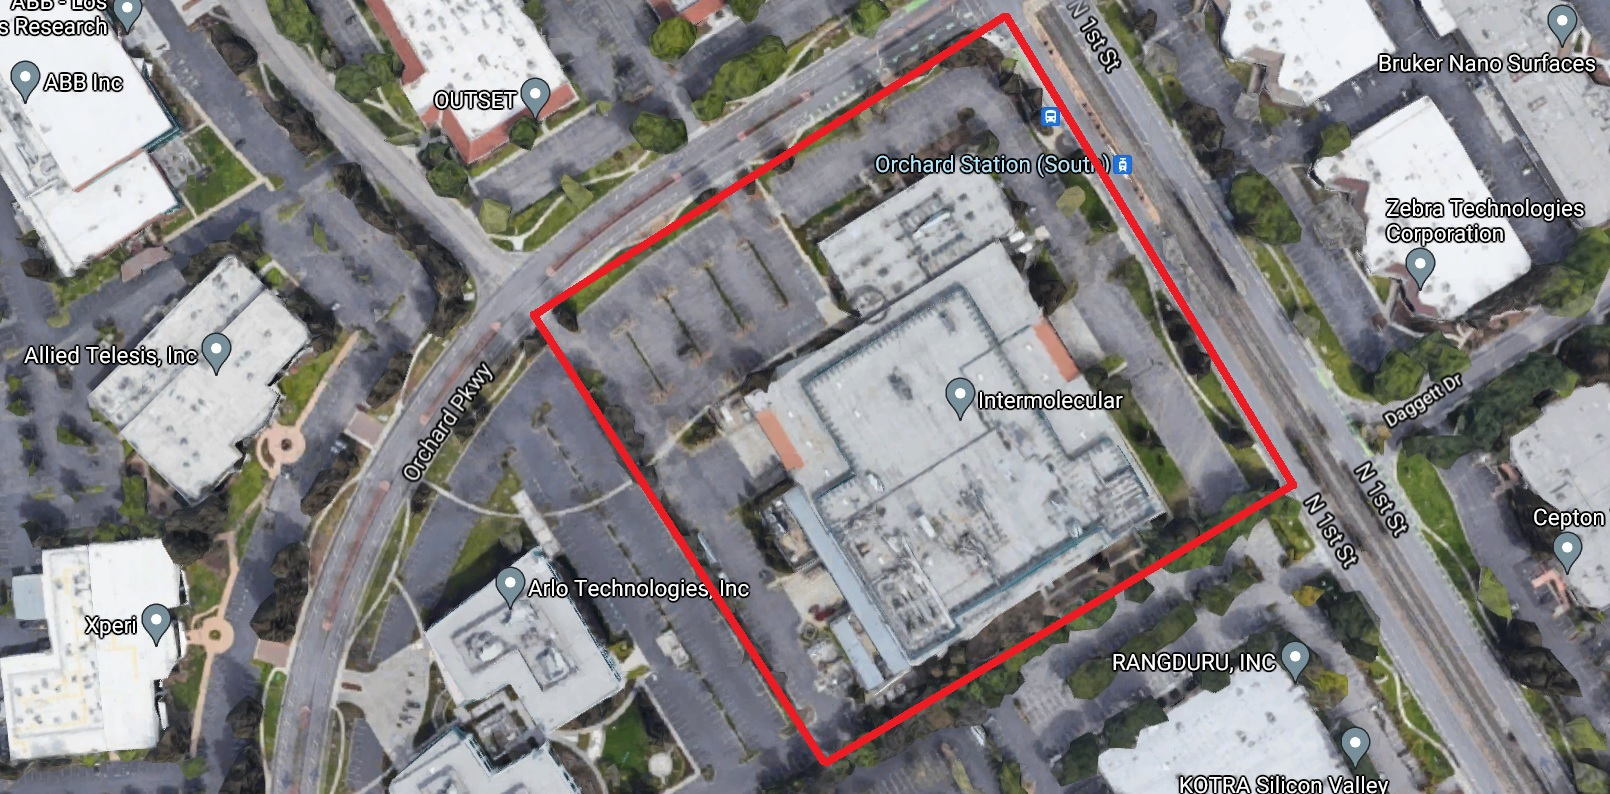 Real estate firm scoops up San Jose site where village was proposed